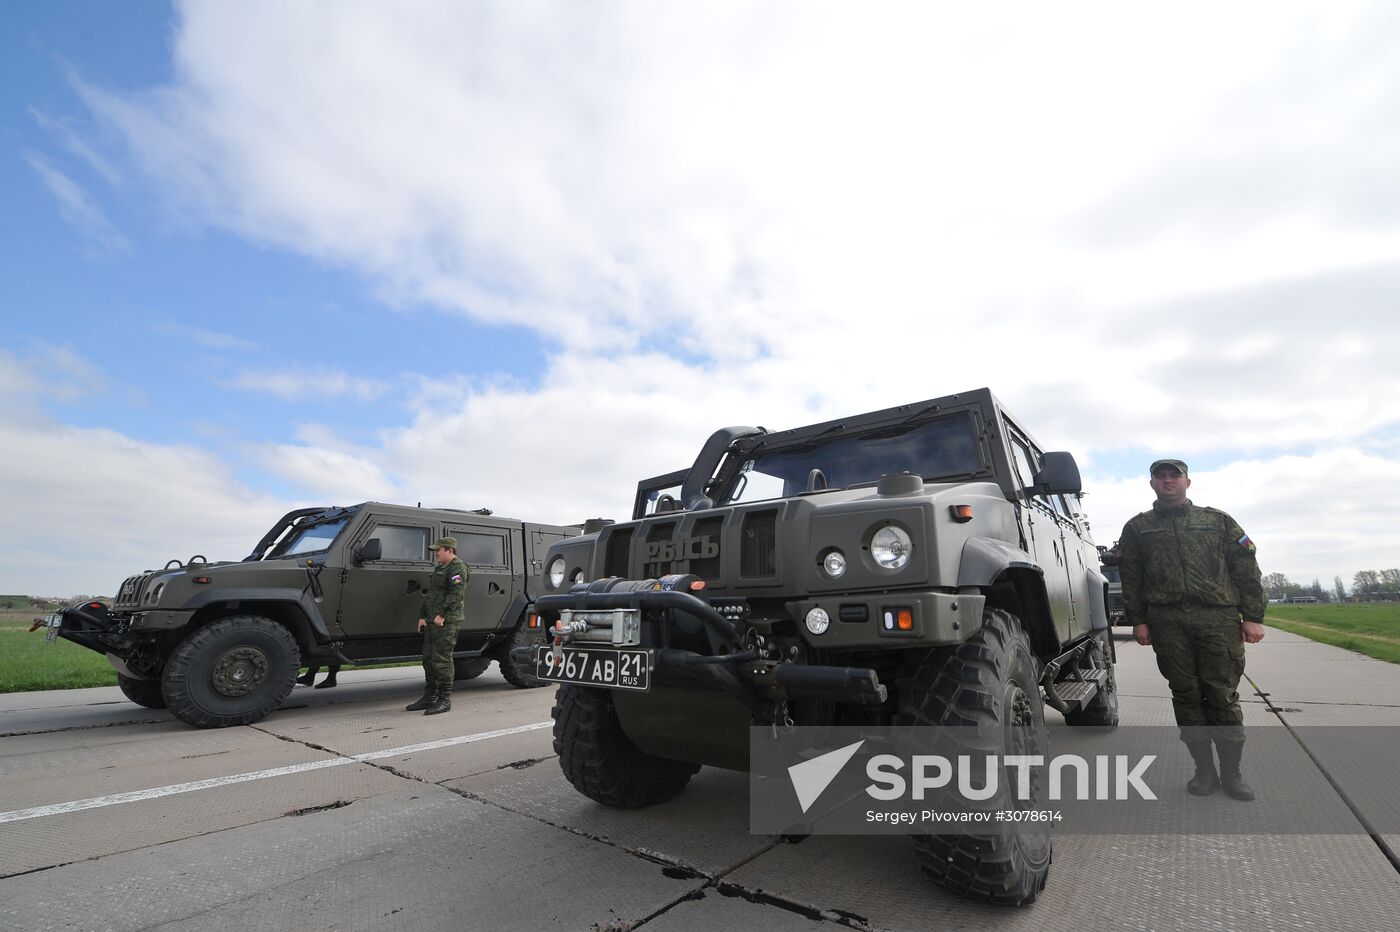 Victory Day parade practice in Rostov-on-Don